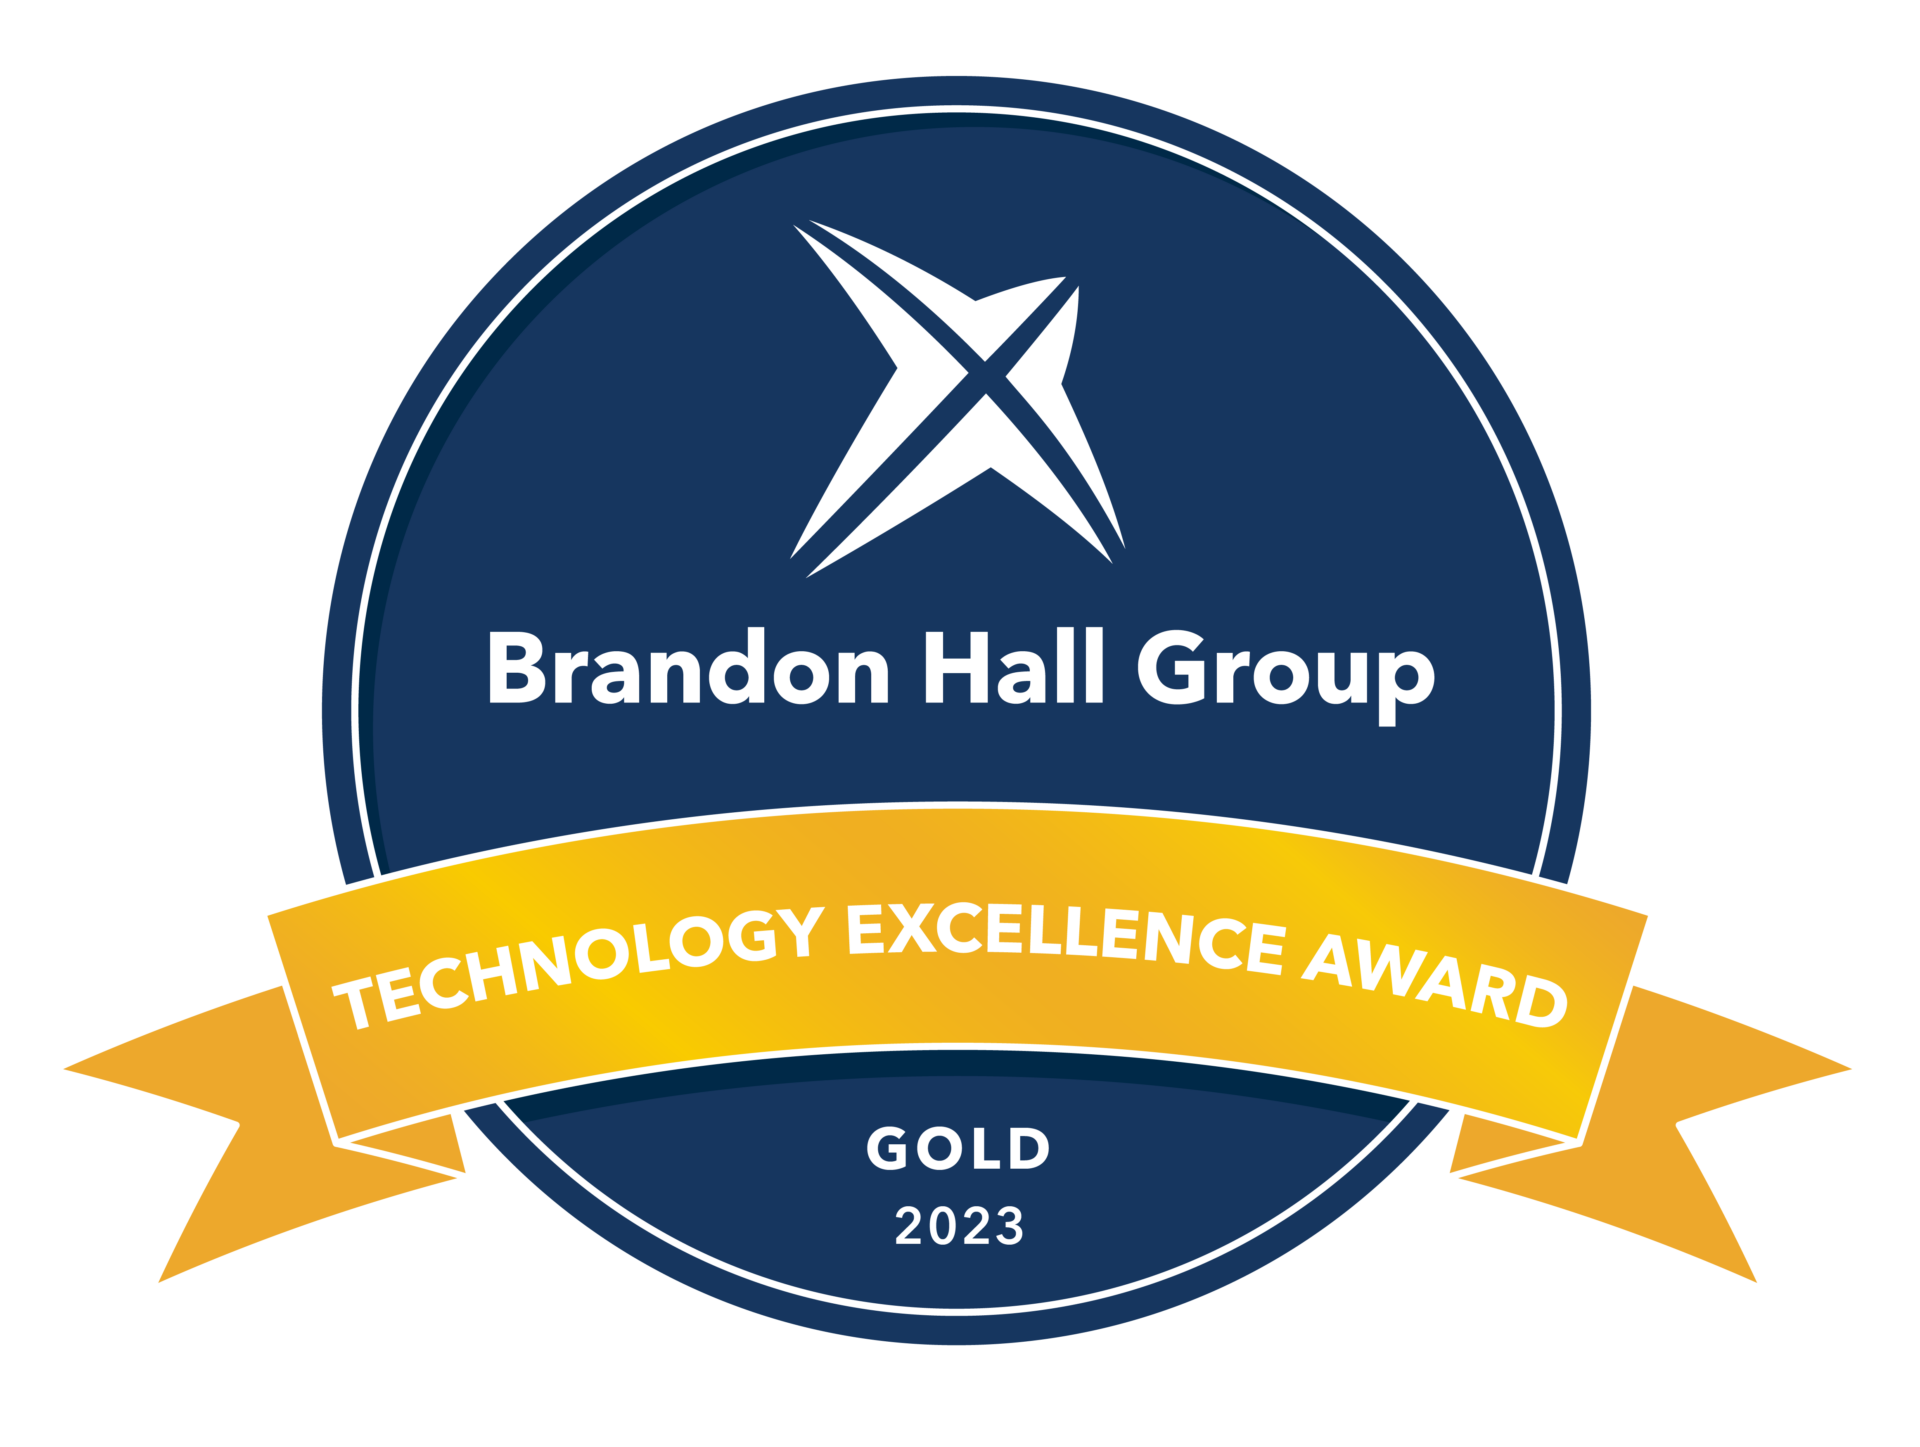 Brainier Wins 2 Gold Awards for Learning Technology in 2023 Brandon Hall Group Awards